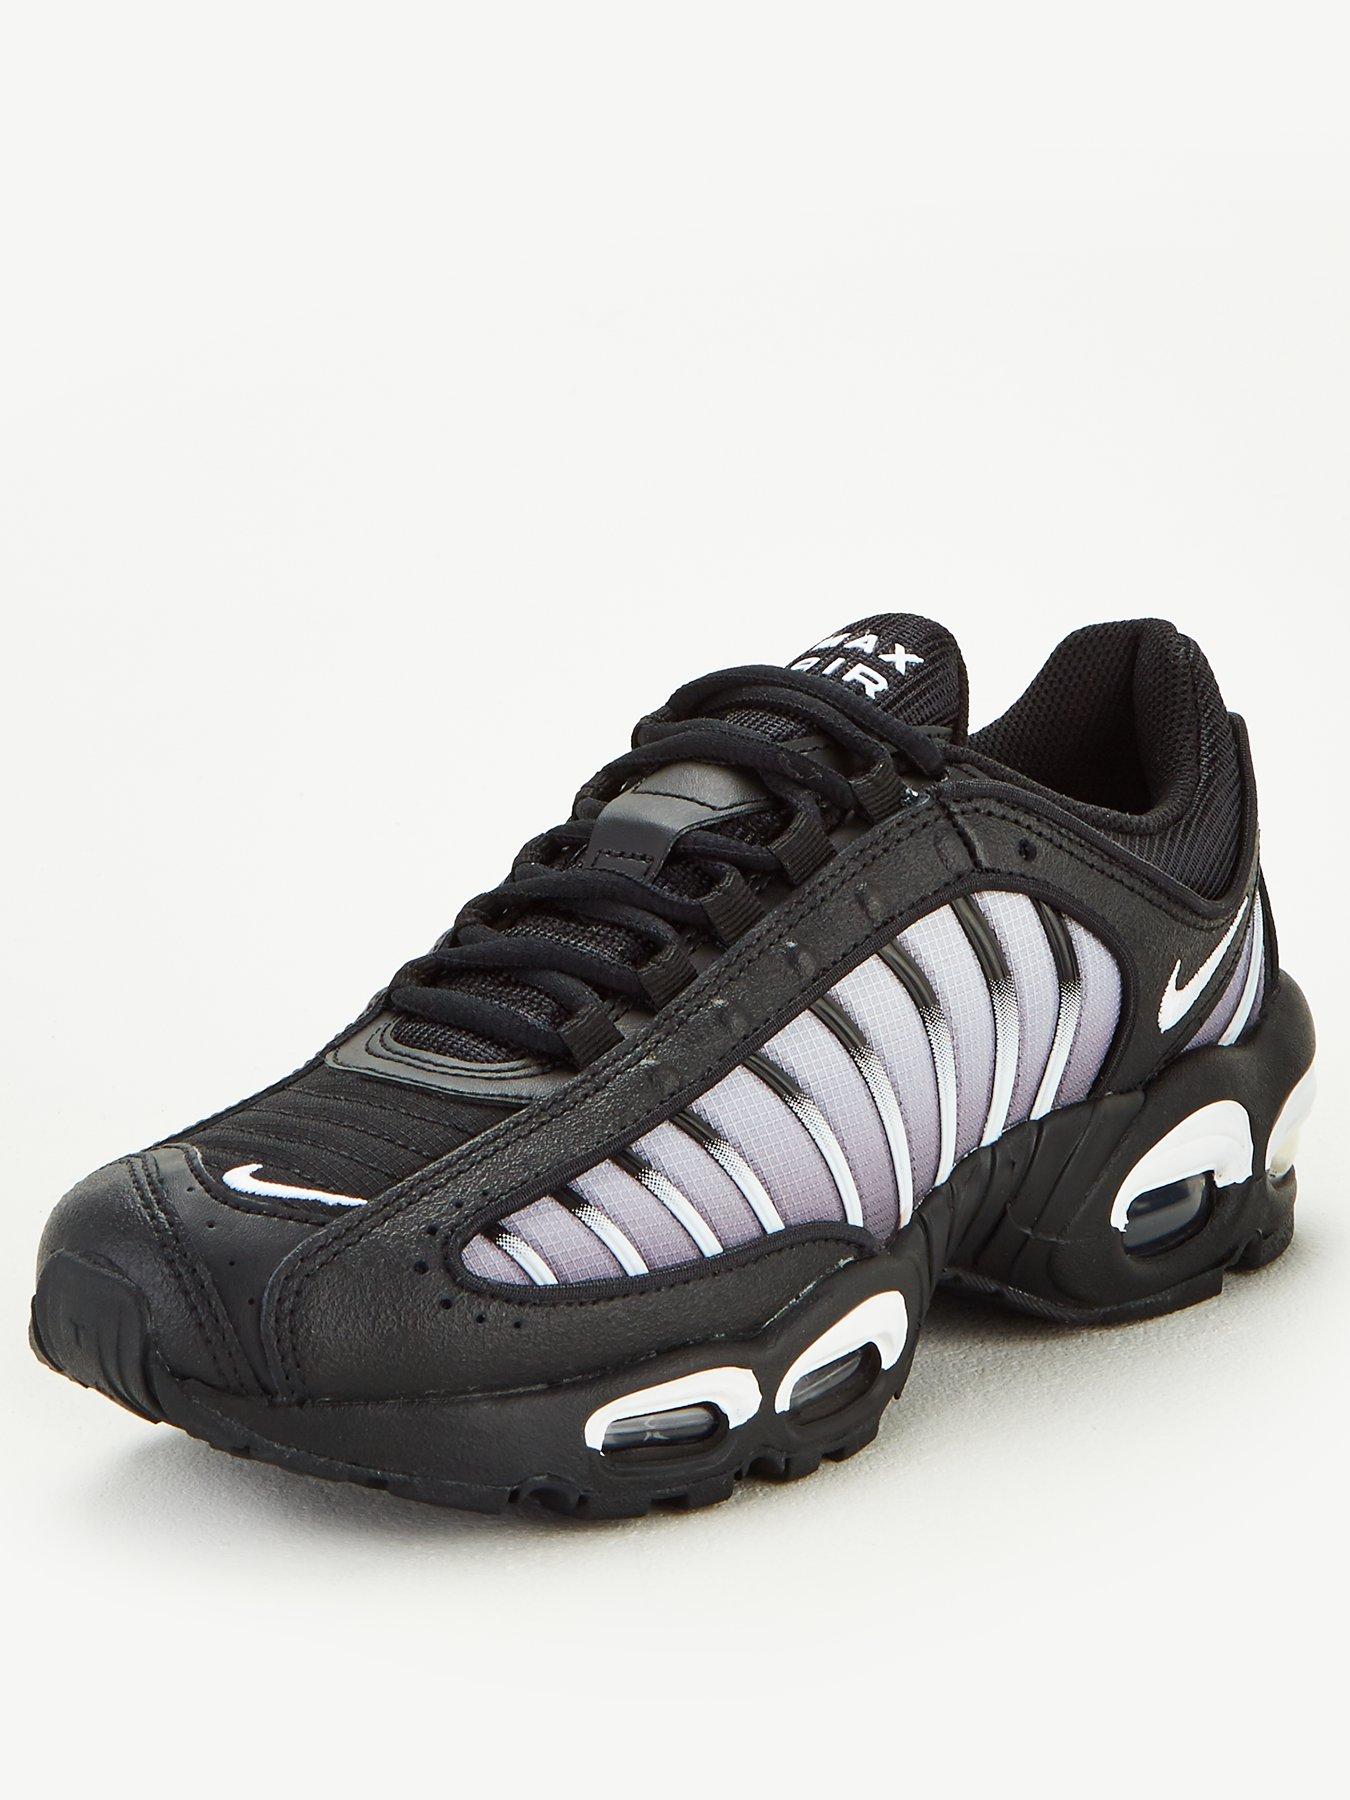 air max tailwind 4 sizing